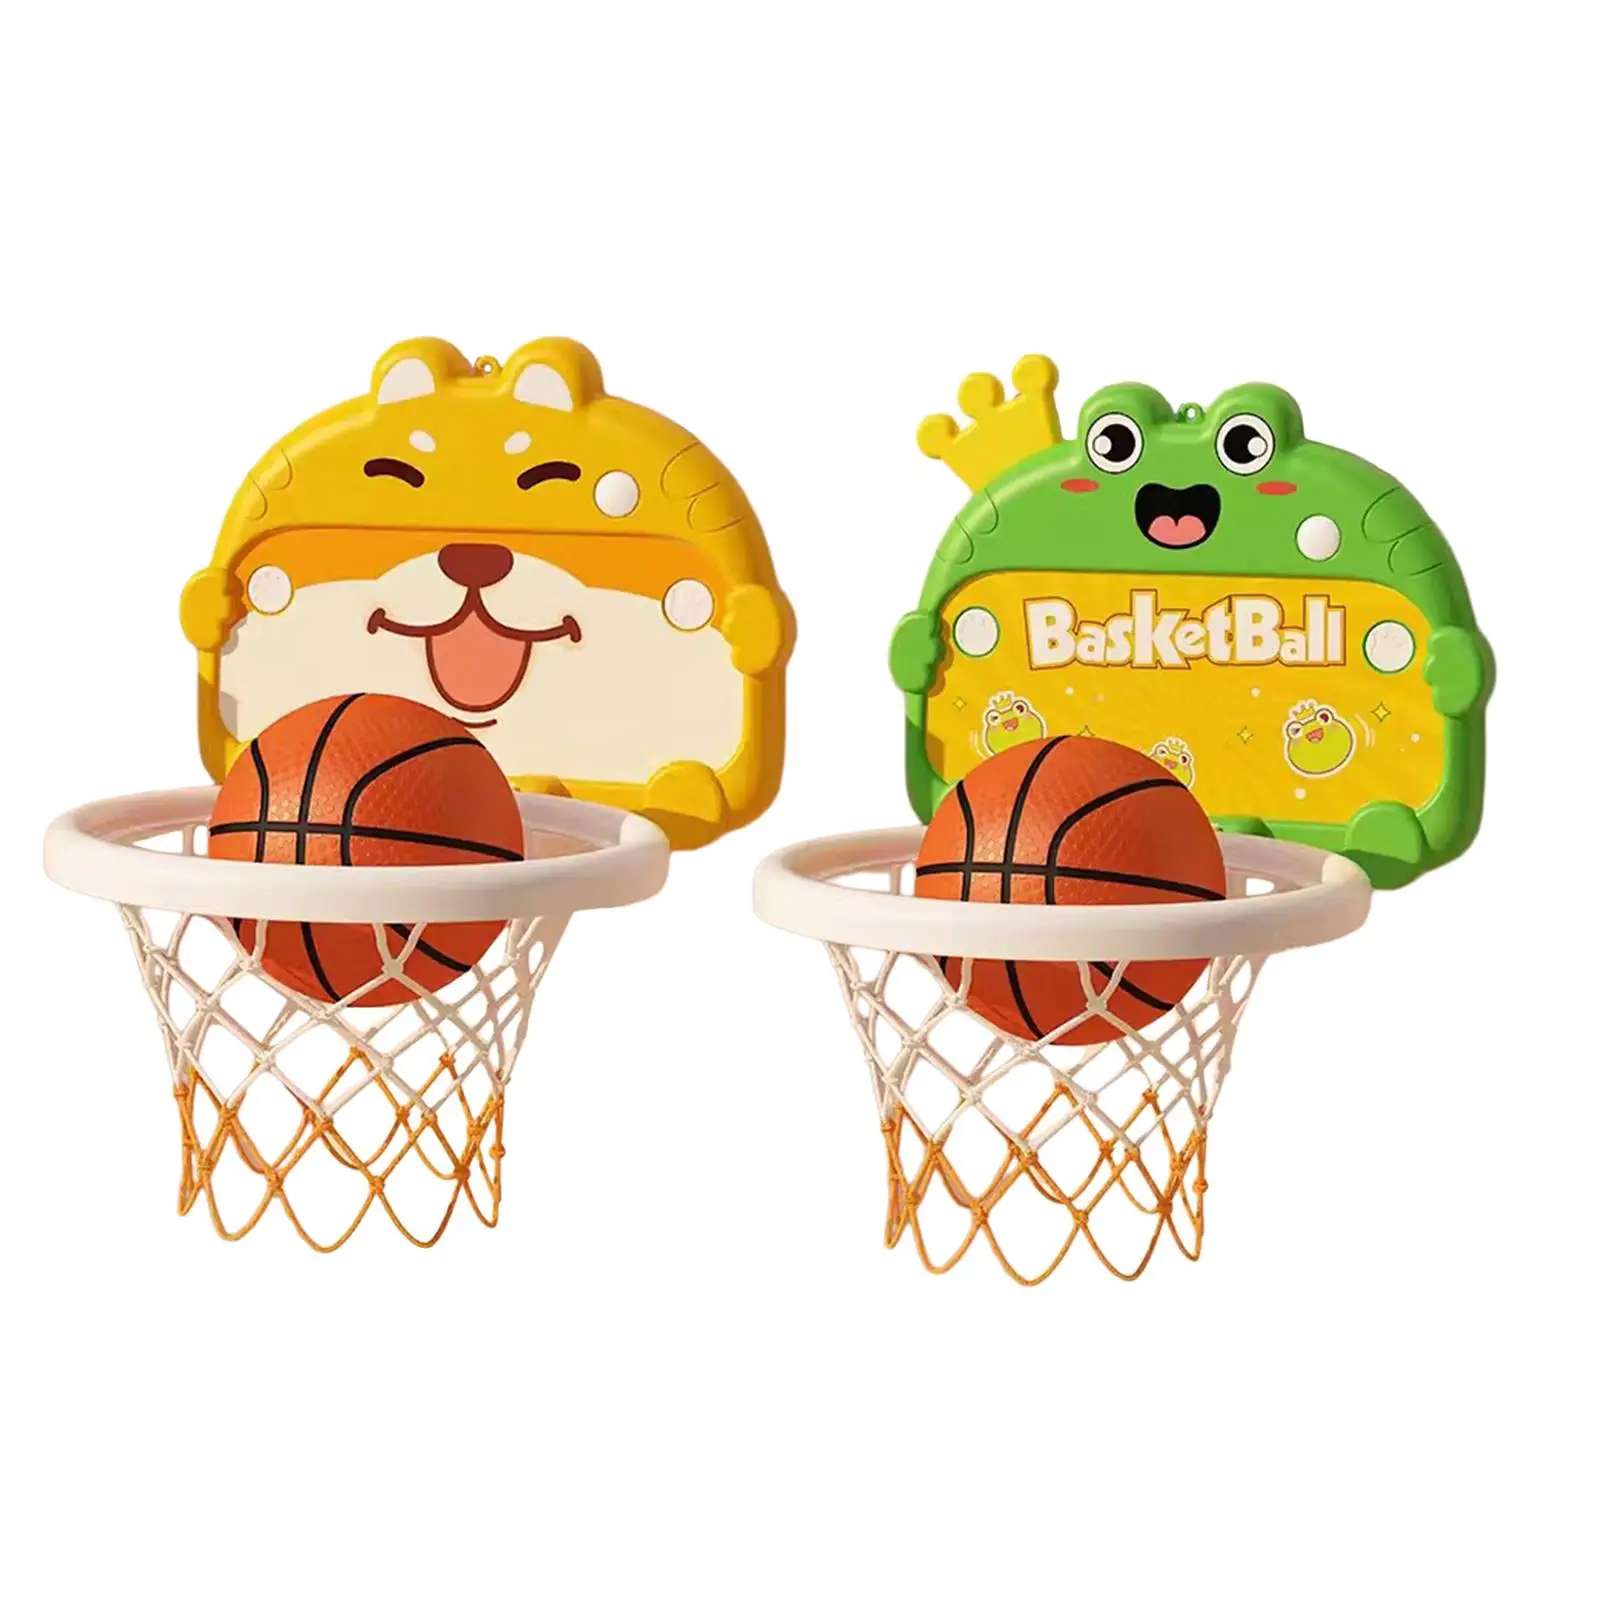 Mini Basketball Hoop Set Family Games Activity Centers, Educational Basketball Toys for Living Room Door